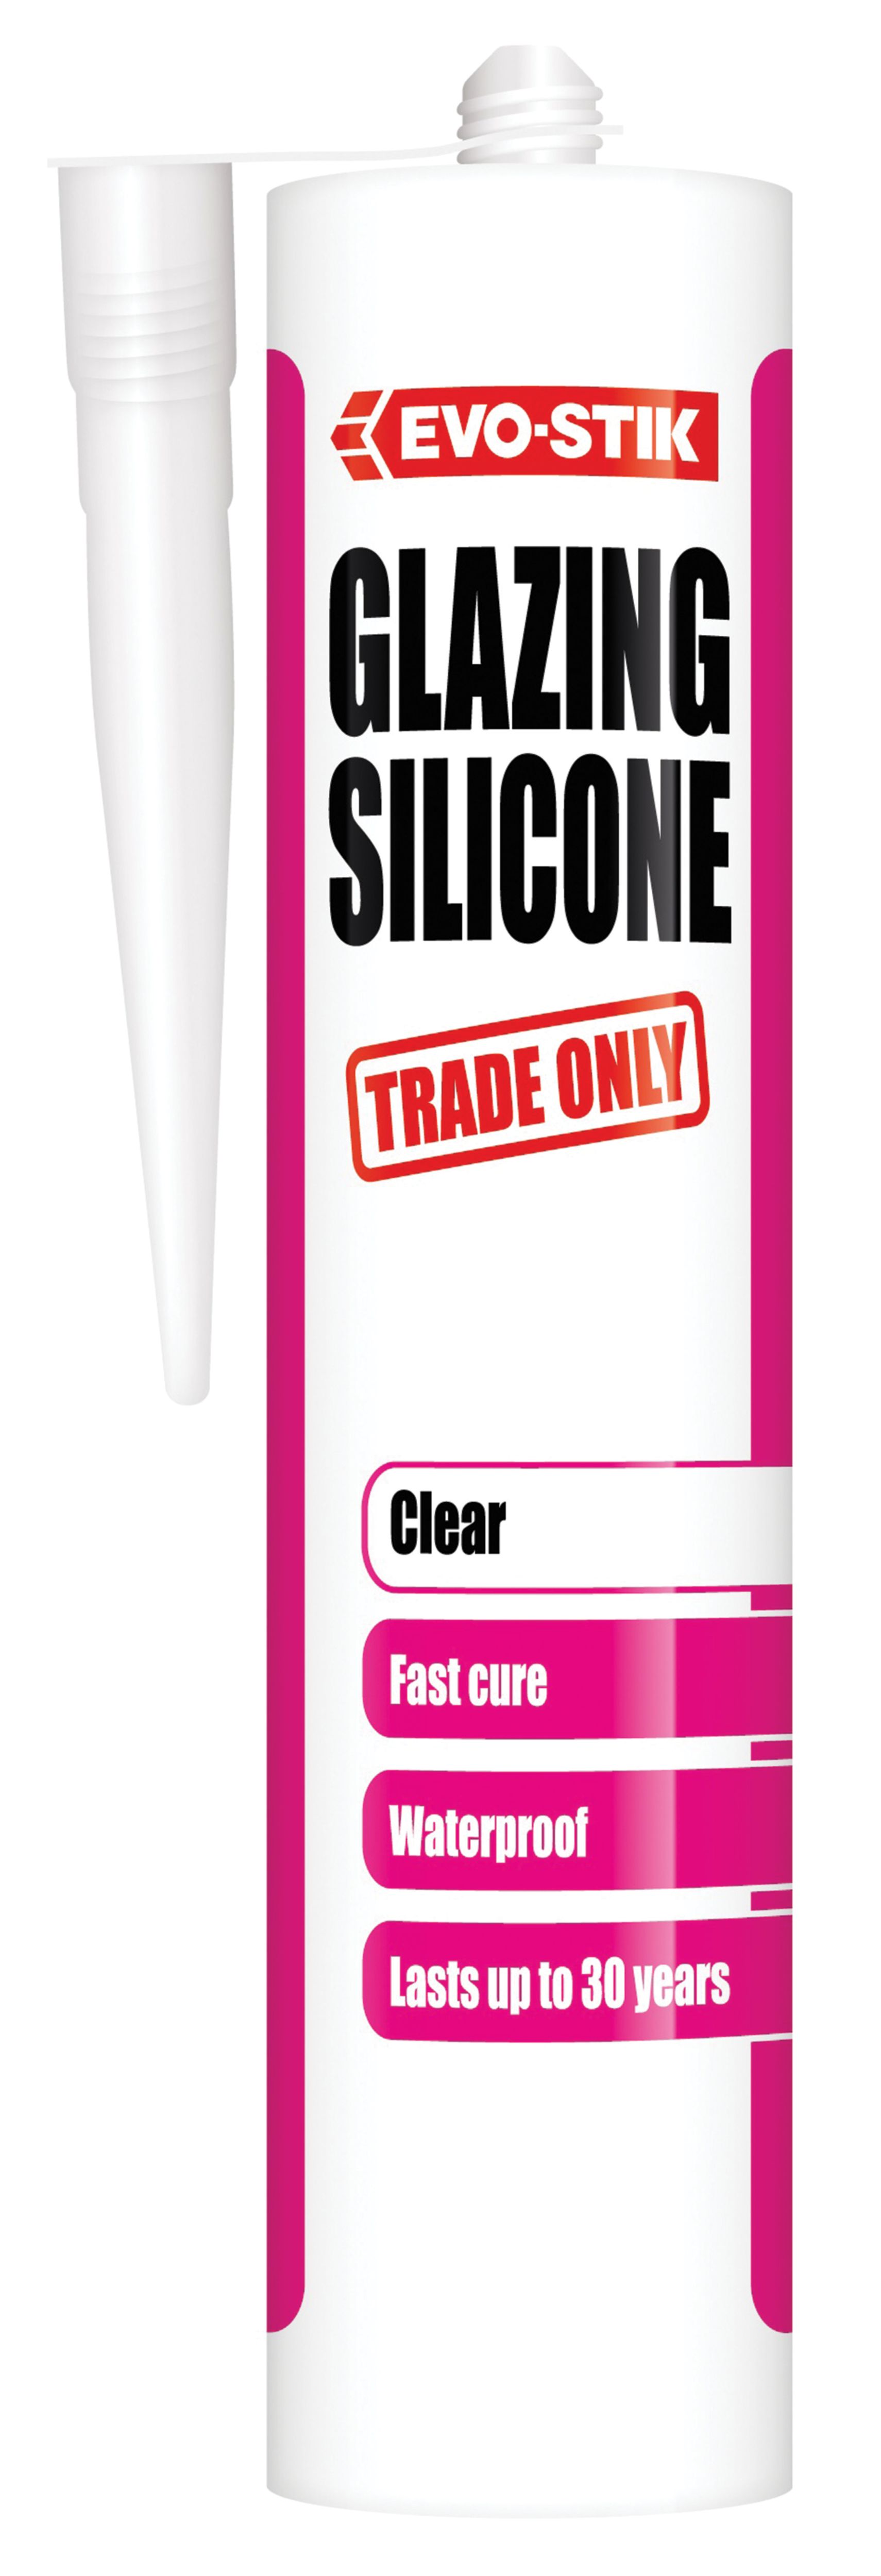 Image of Evo-Stik Trade Only Glazing Silicone - Clear - 280ml